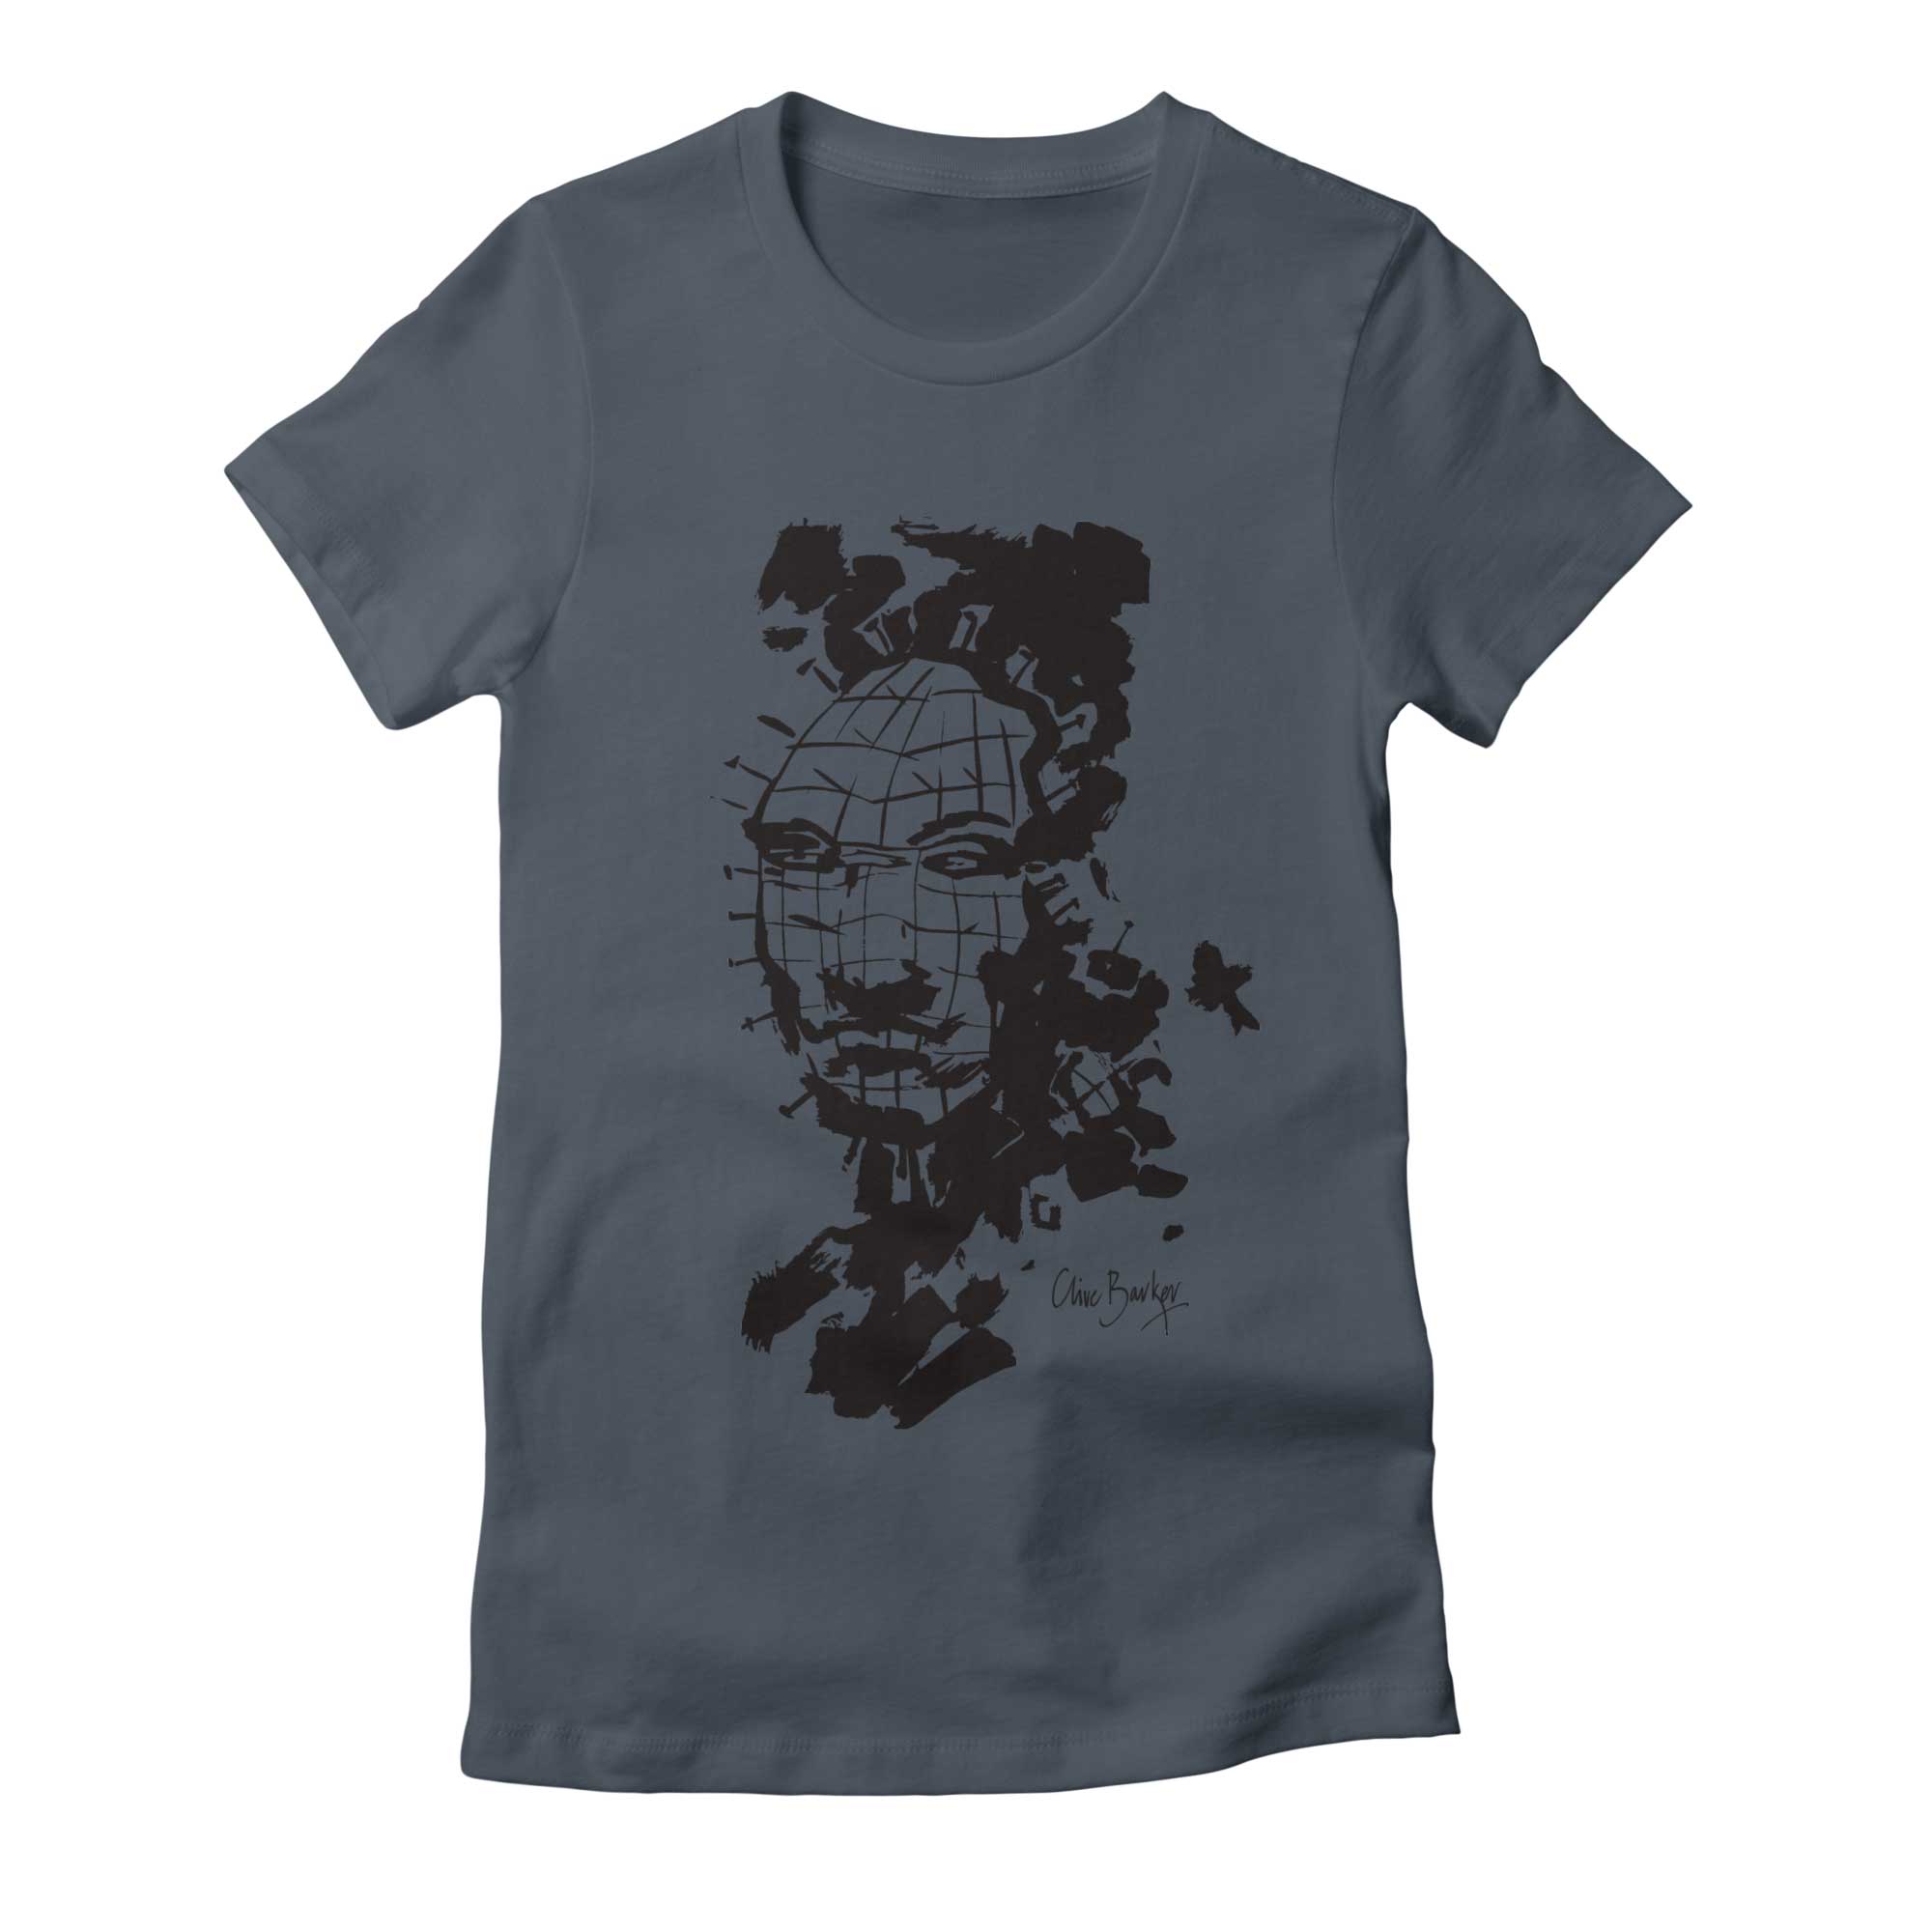 Clive Barker - From the Shadows tee